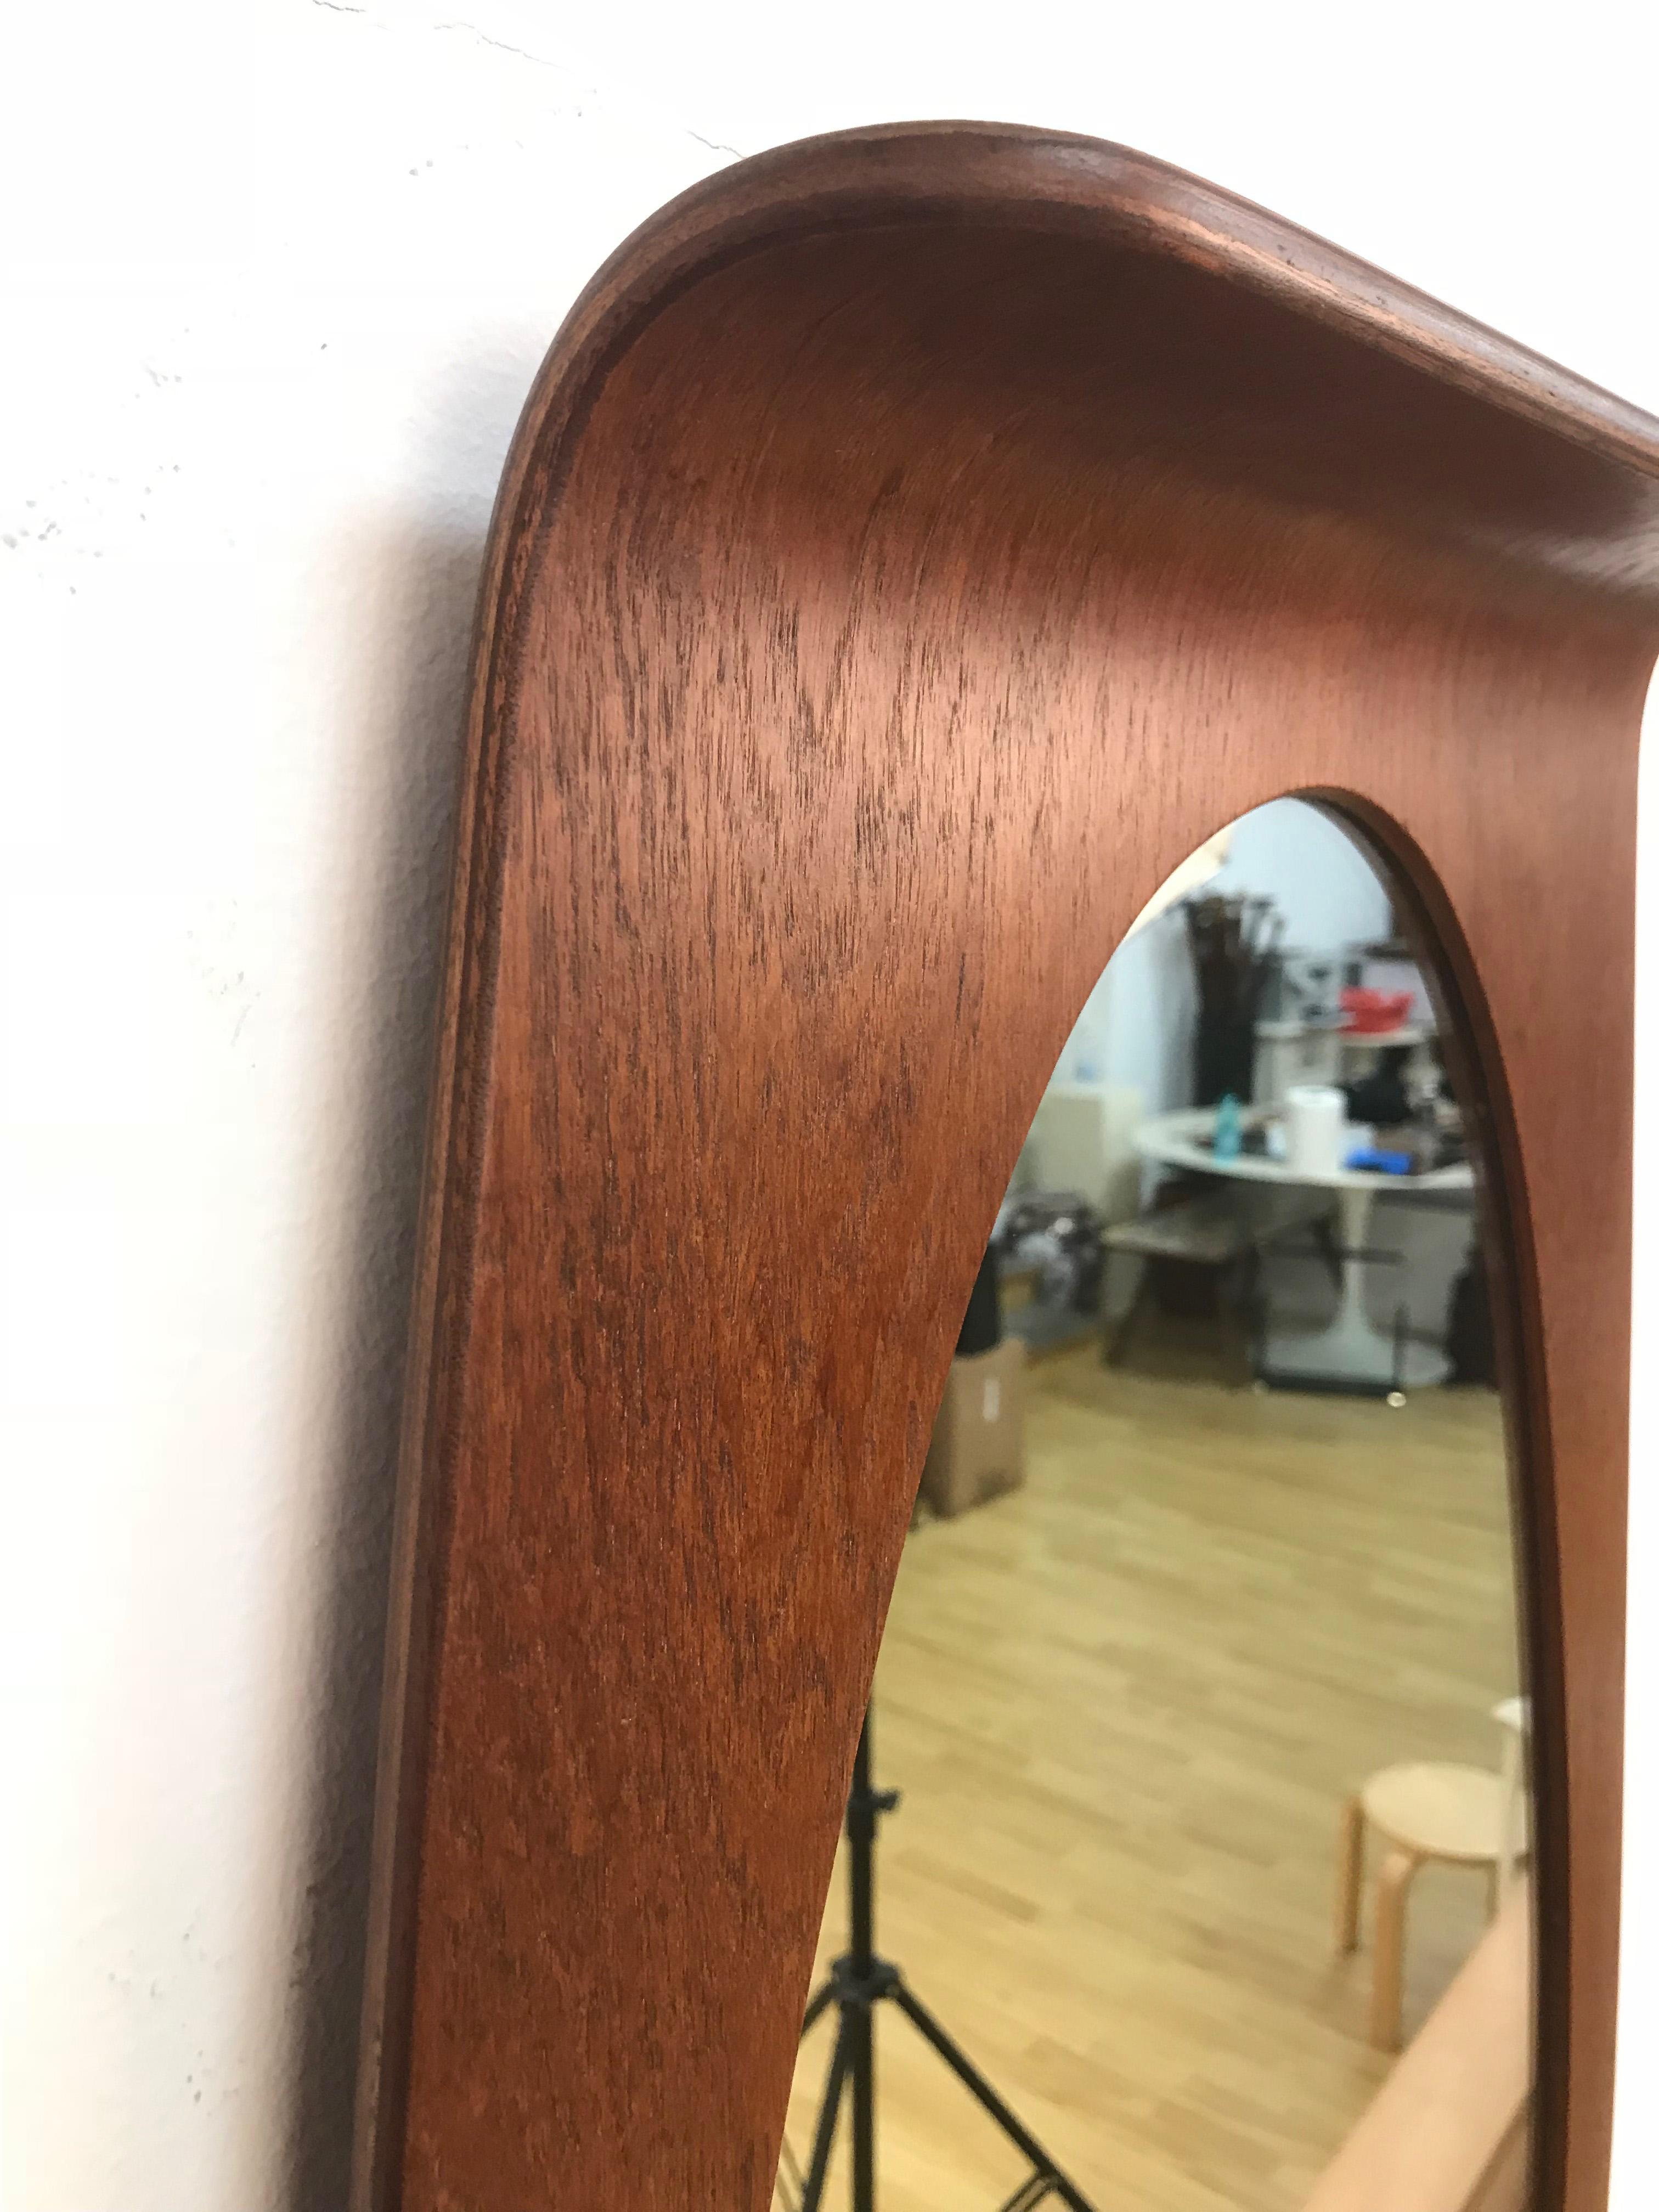 Midcentury Franco Campo and Carlo Graffi Curved Wood Italian Wall Mirror, 1960s 7